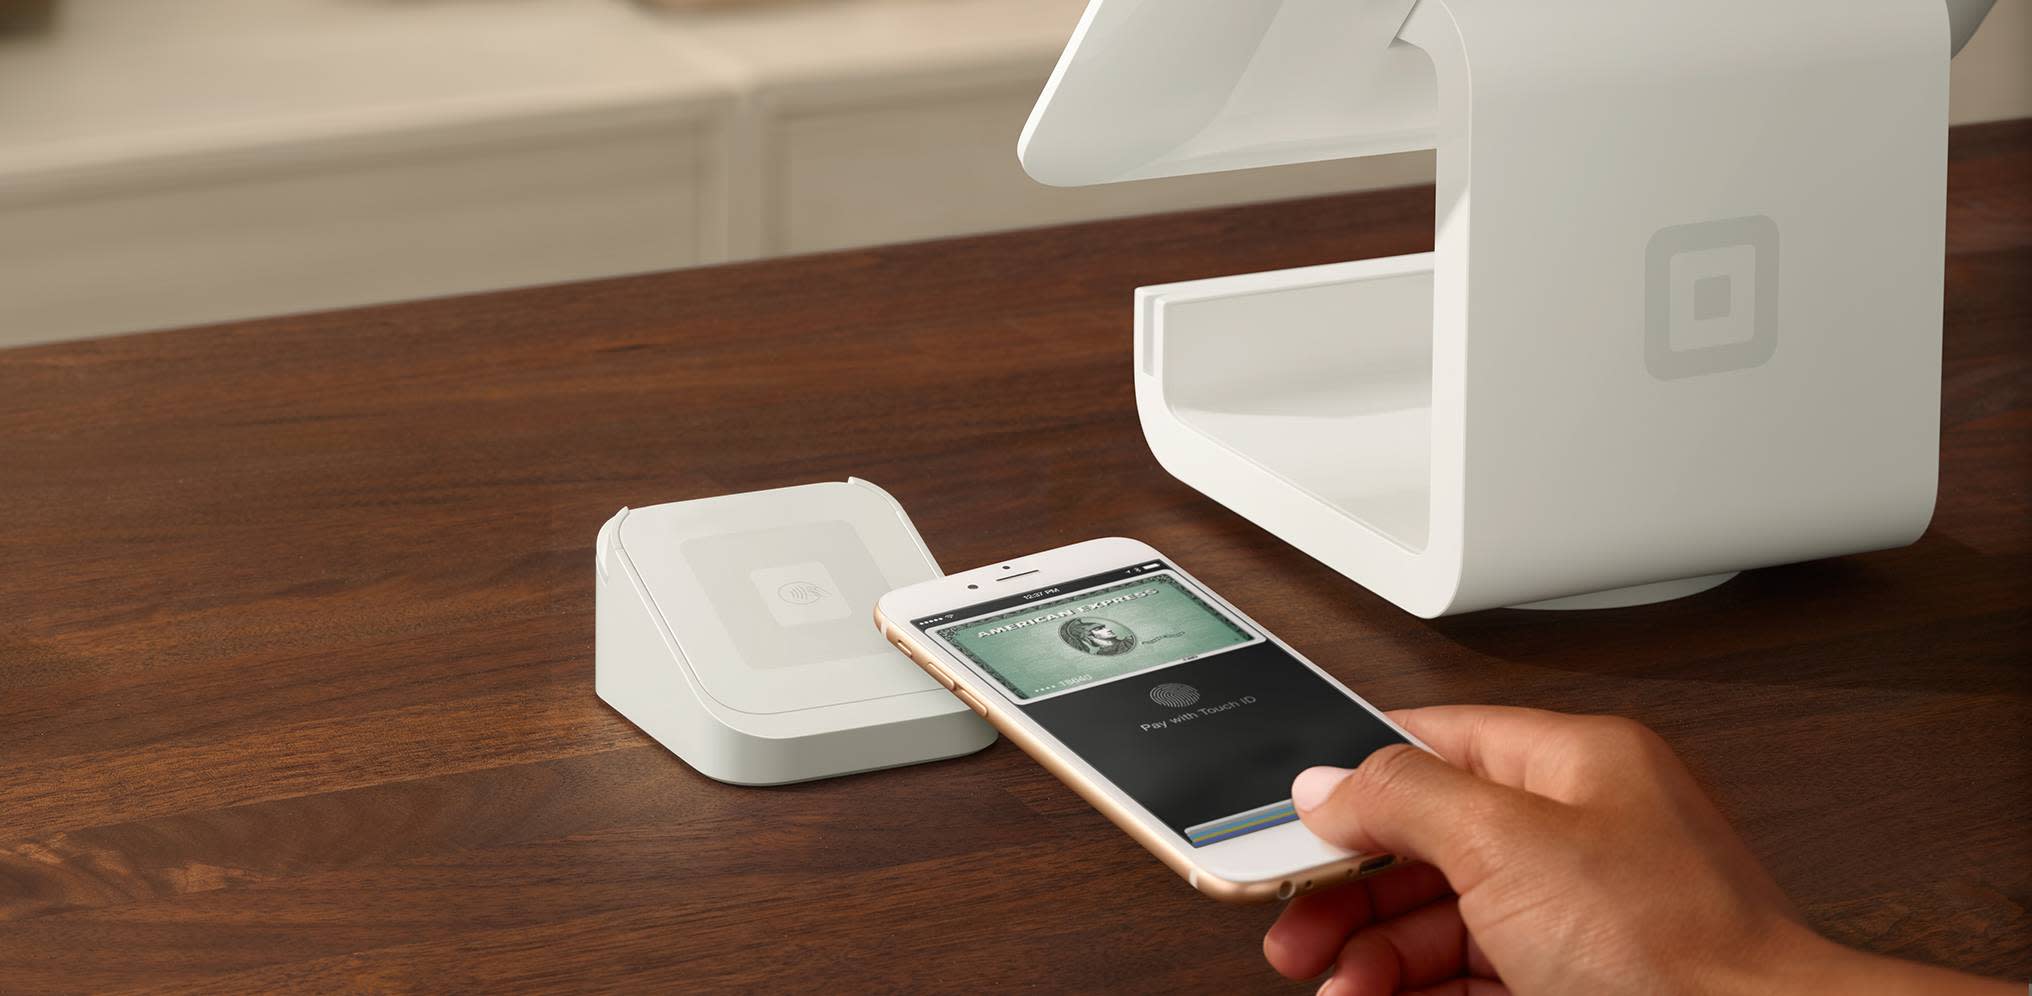 Dock for the Square contactless, Apple Pay, and chip ...